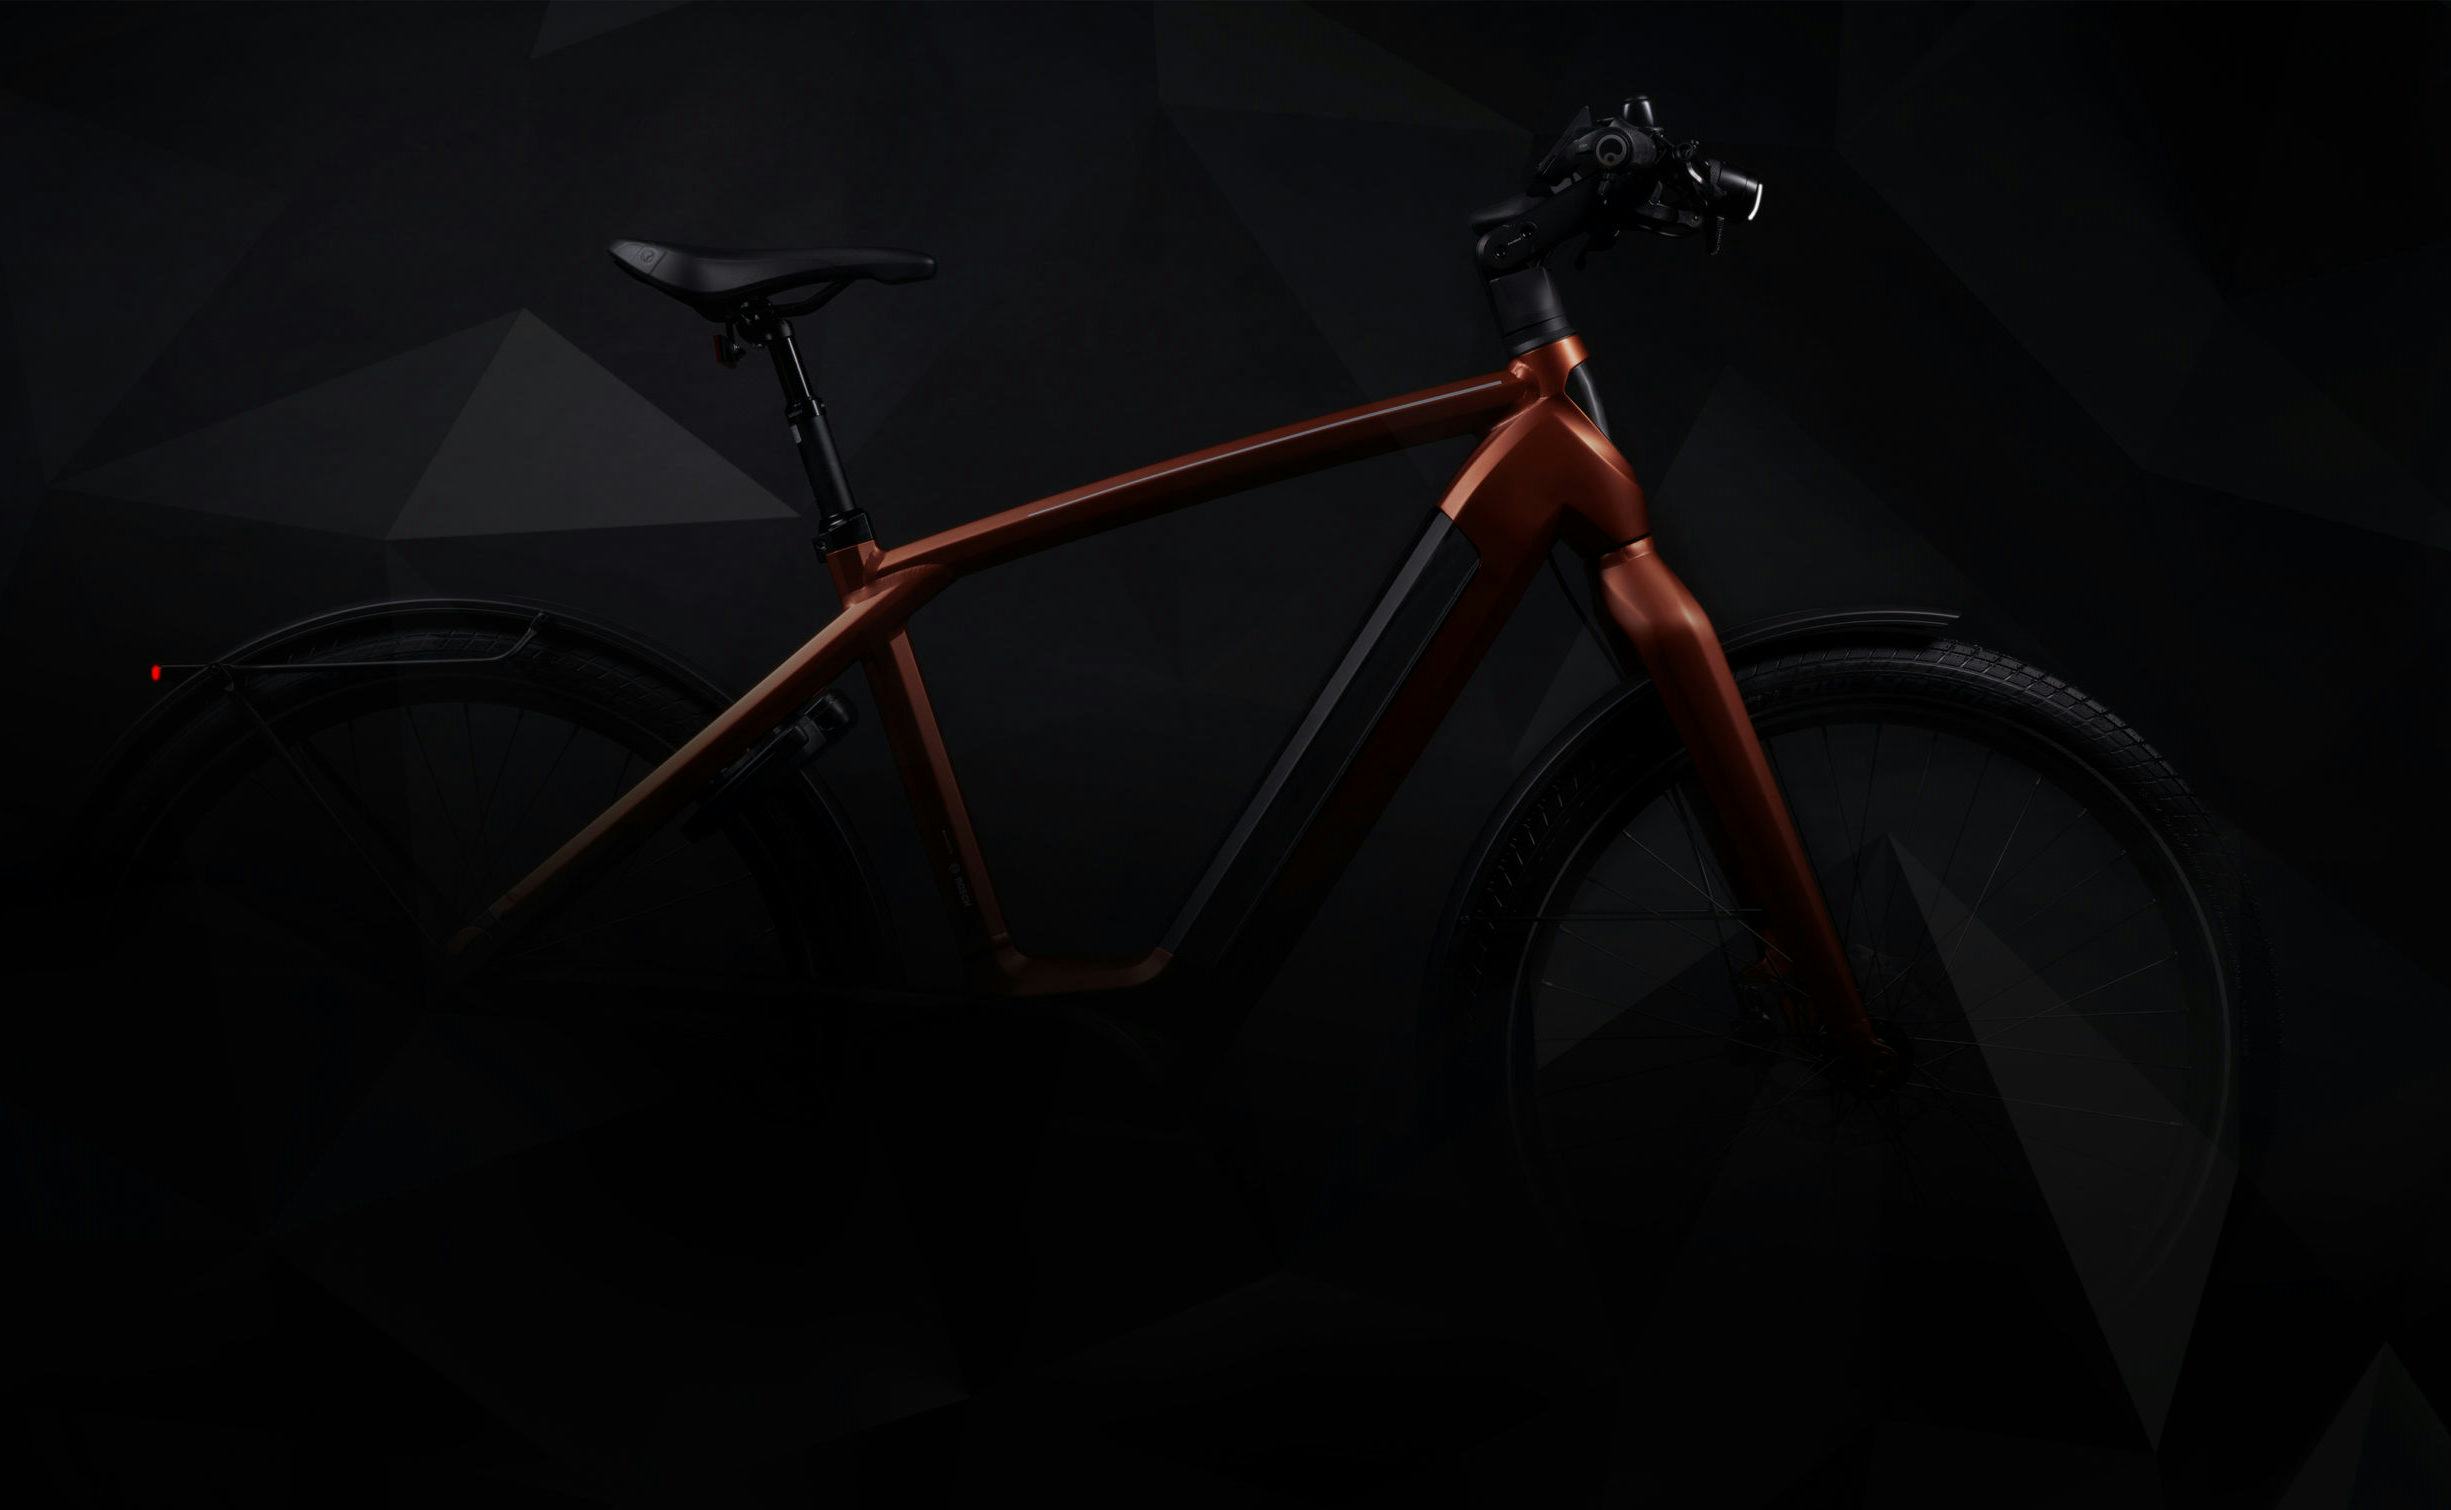 E-bike character embodied by distinctive design